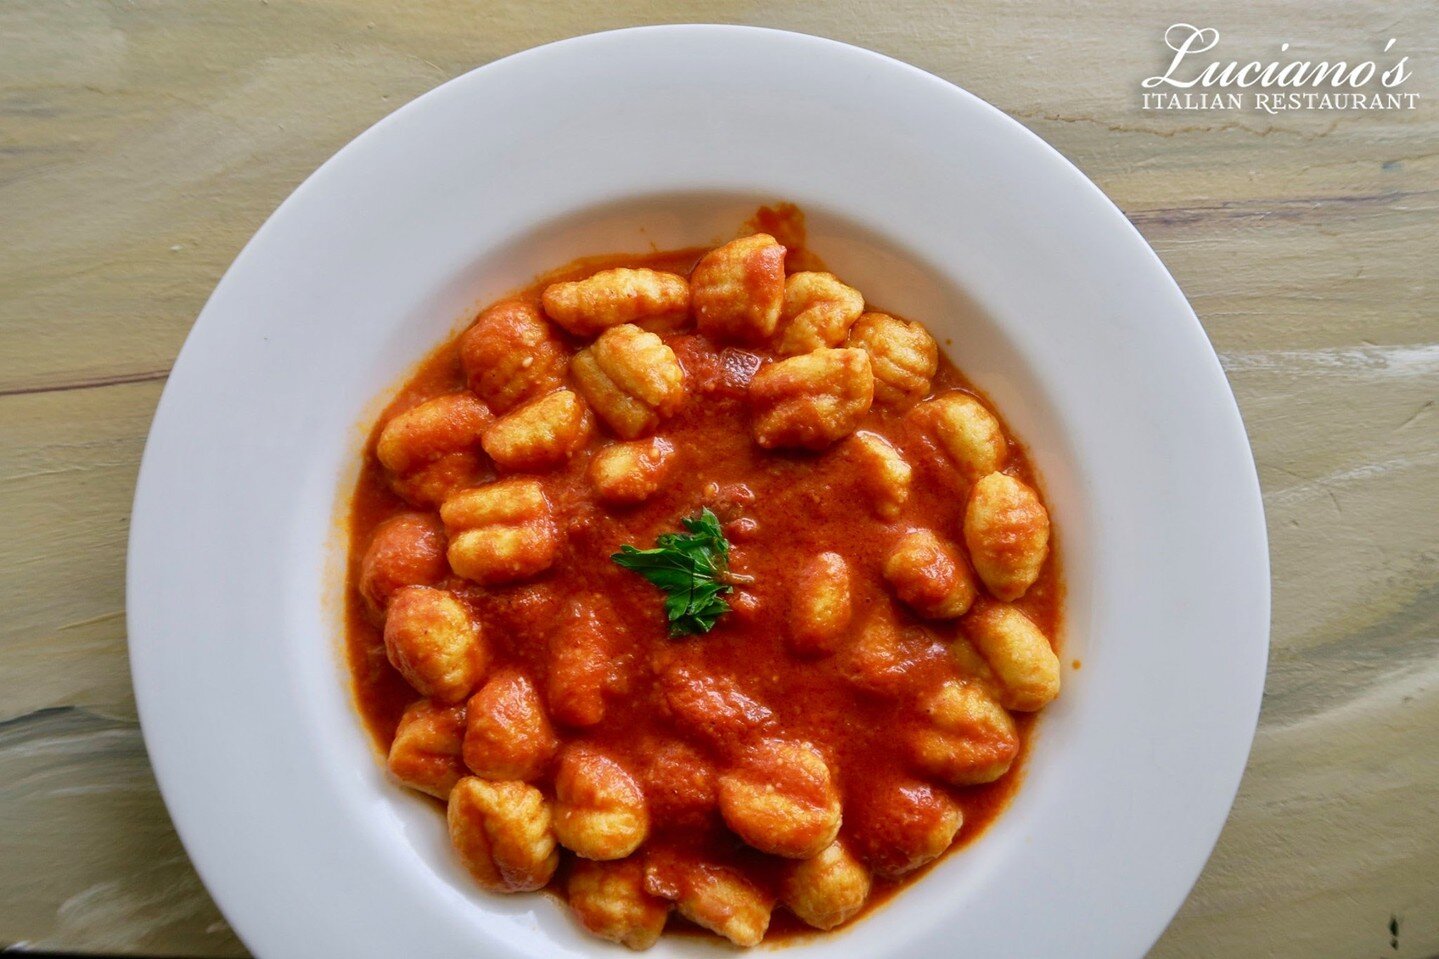 What's delicious for dinner tonight? Our Gnocchi! Italian potato dumplings tossed with meat or plain sauce.